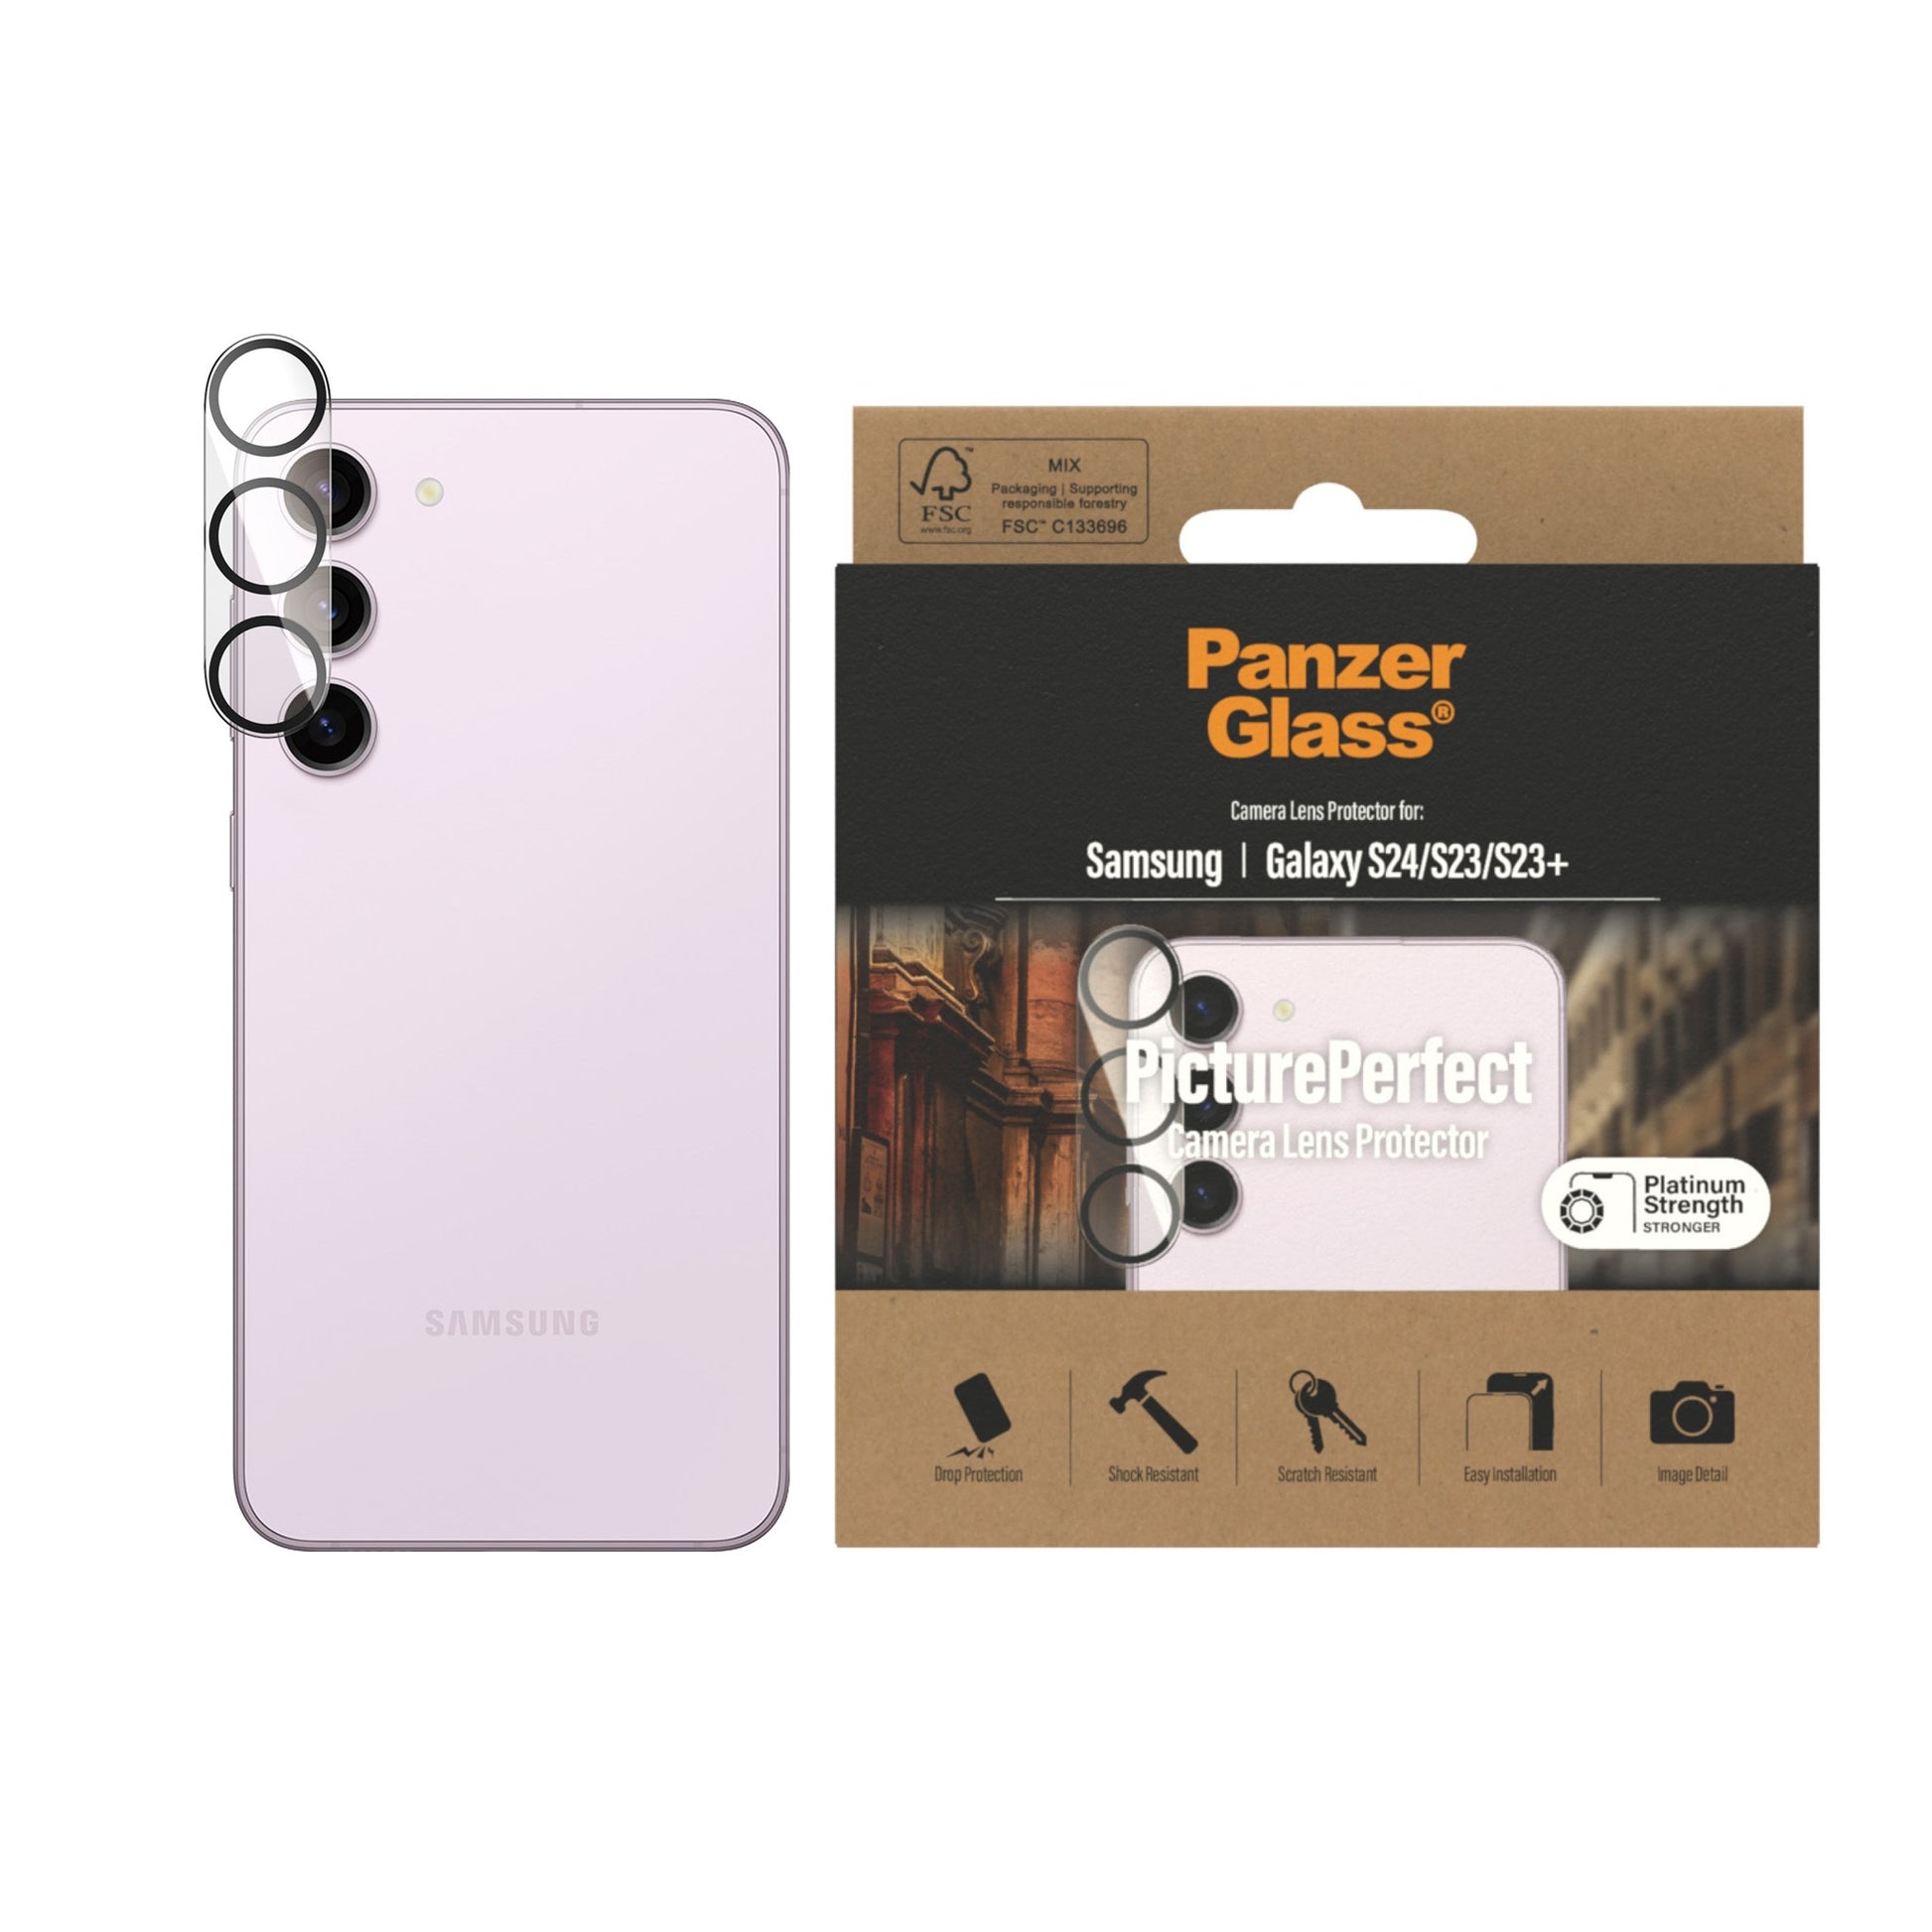 PanzerGlass™ PicturePerfect Camera Lens Protector Samsung Galaxy S23 | S23+ 2